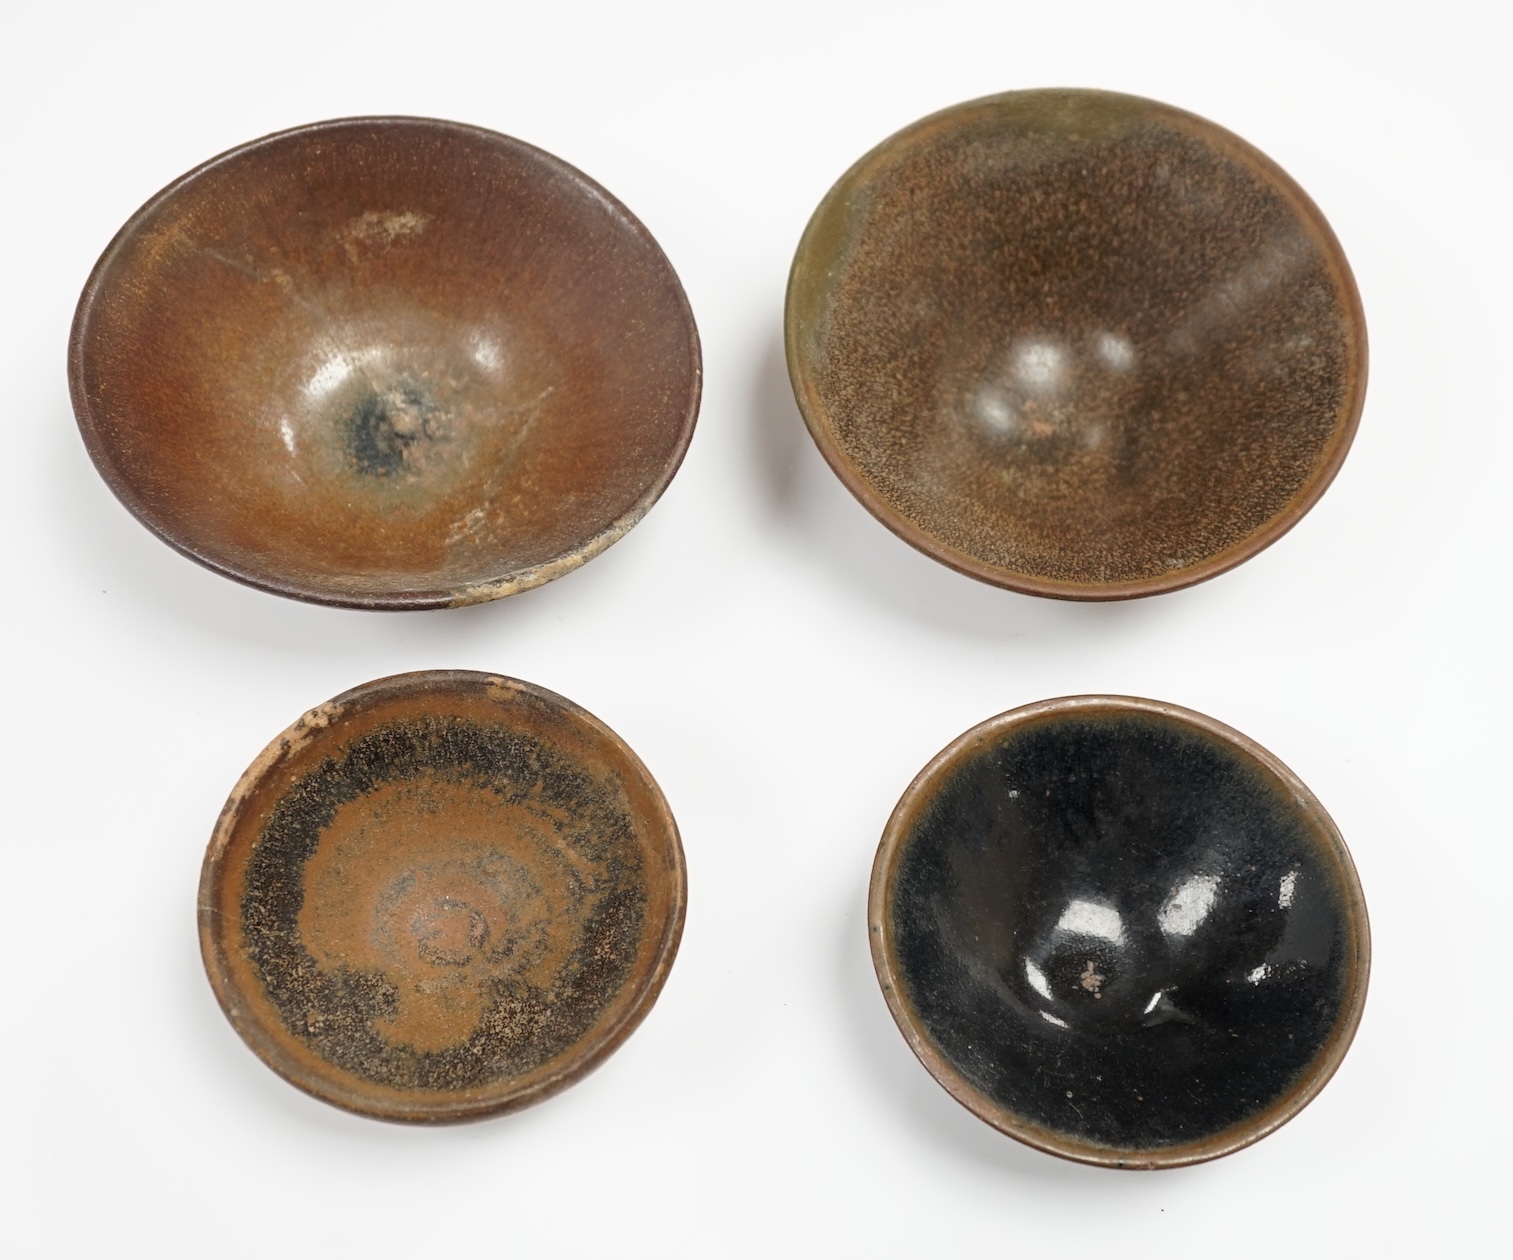 Four Chinese Jian ware bowls, Song dynasty, hare’s fur etc. largest 12cm in diameter                                                                                                                                        